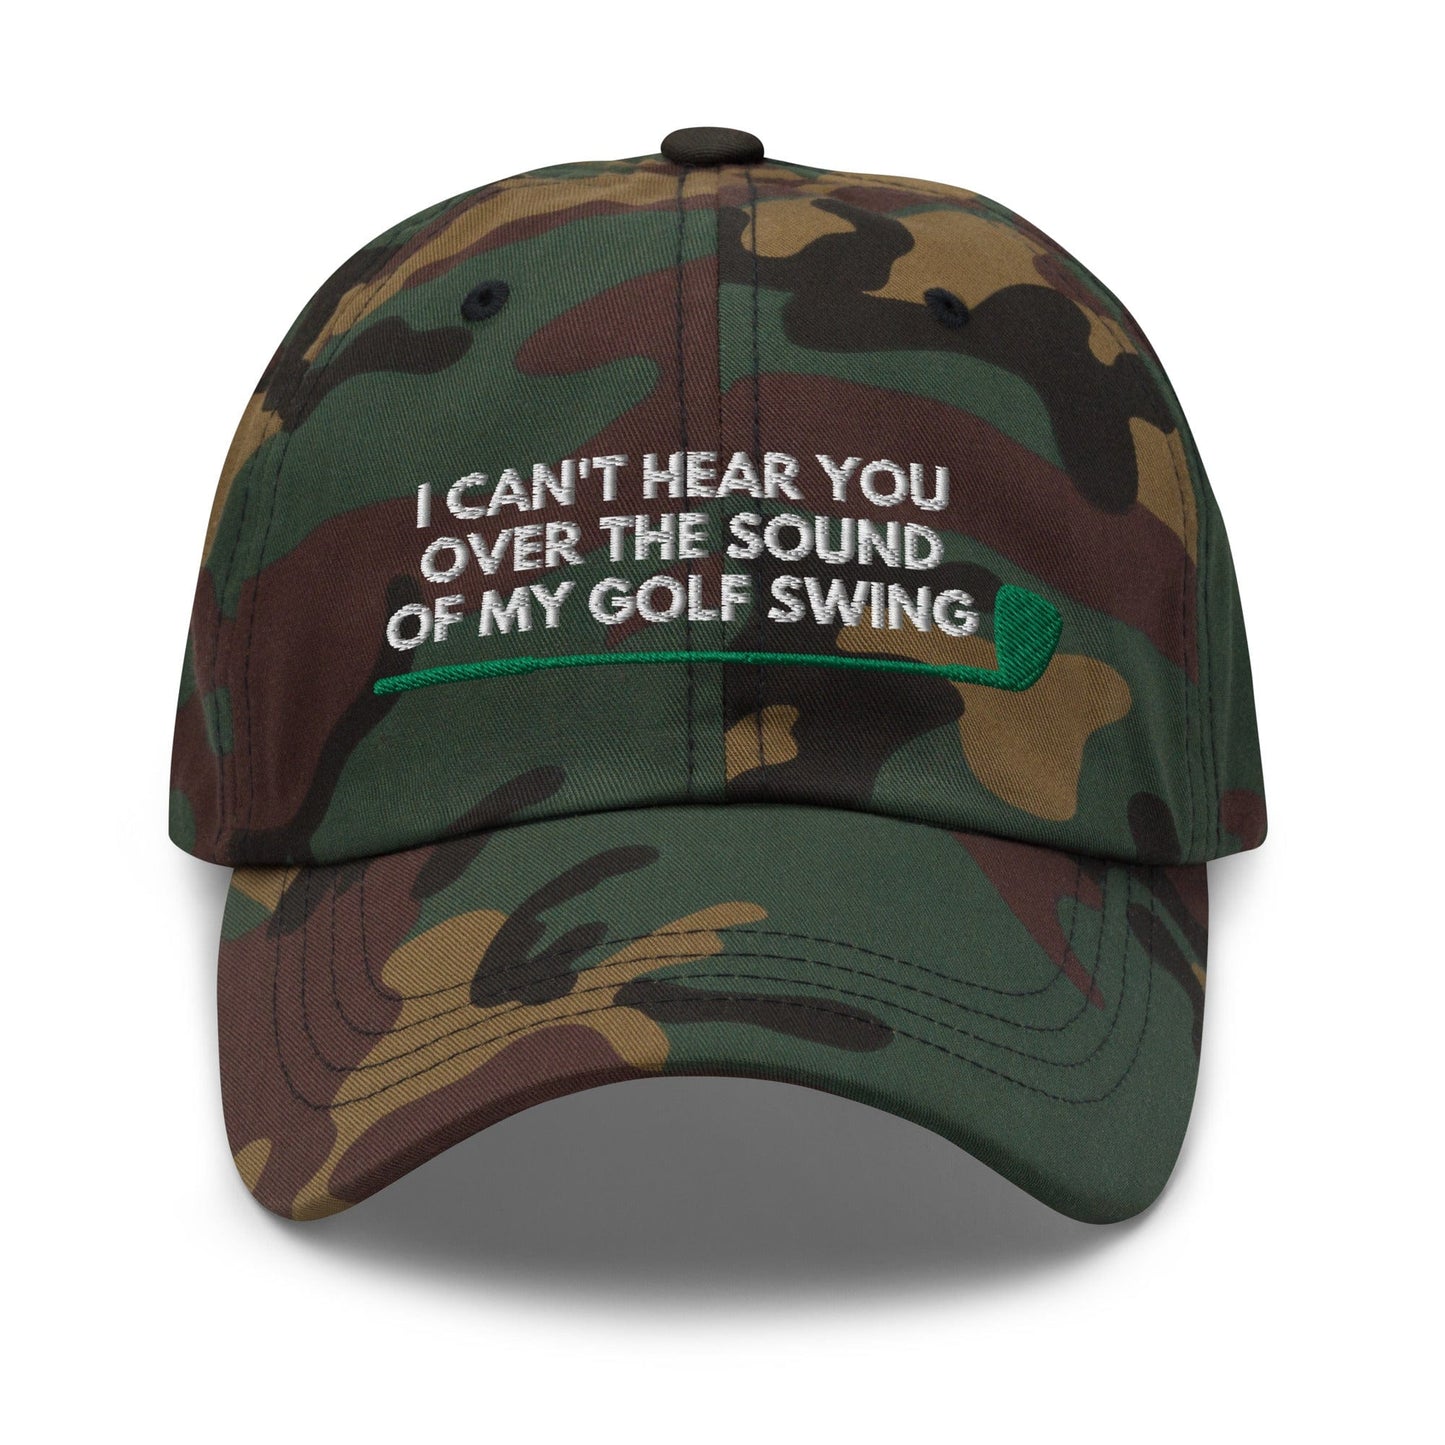 Funny Golfer Gifts  Dad Cap I Cant Hear You Over The Sound Of My Golf Swing Hat Cap